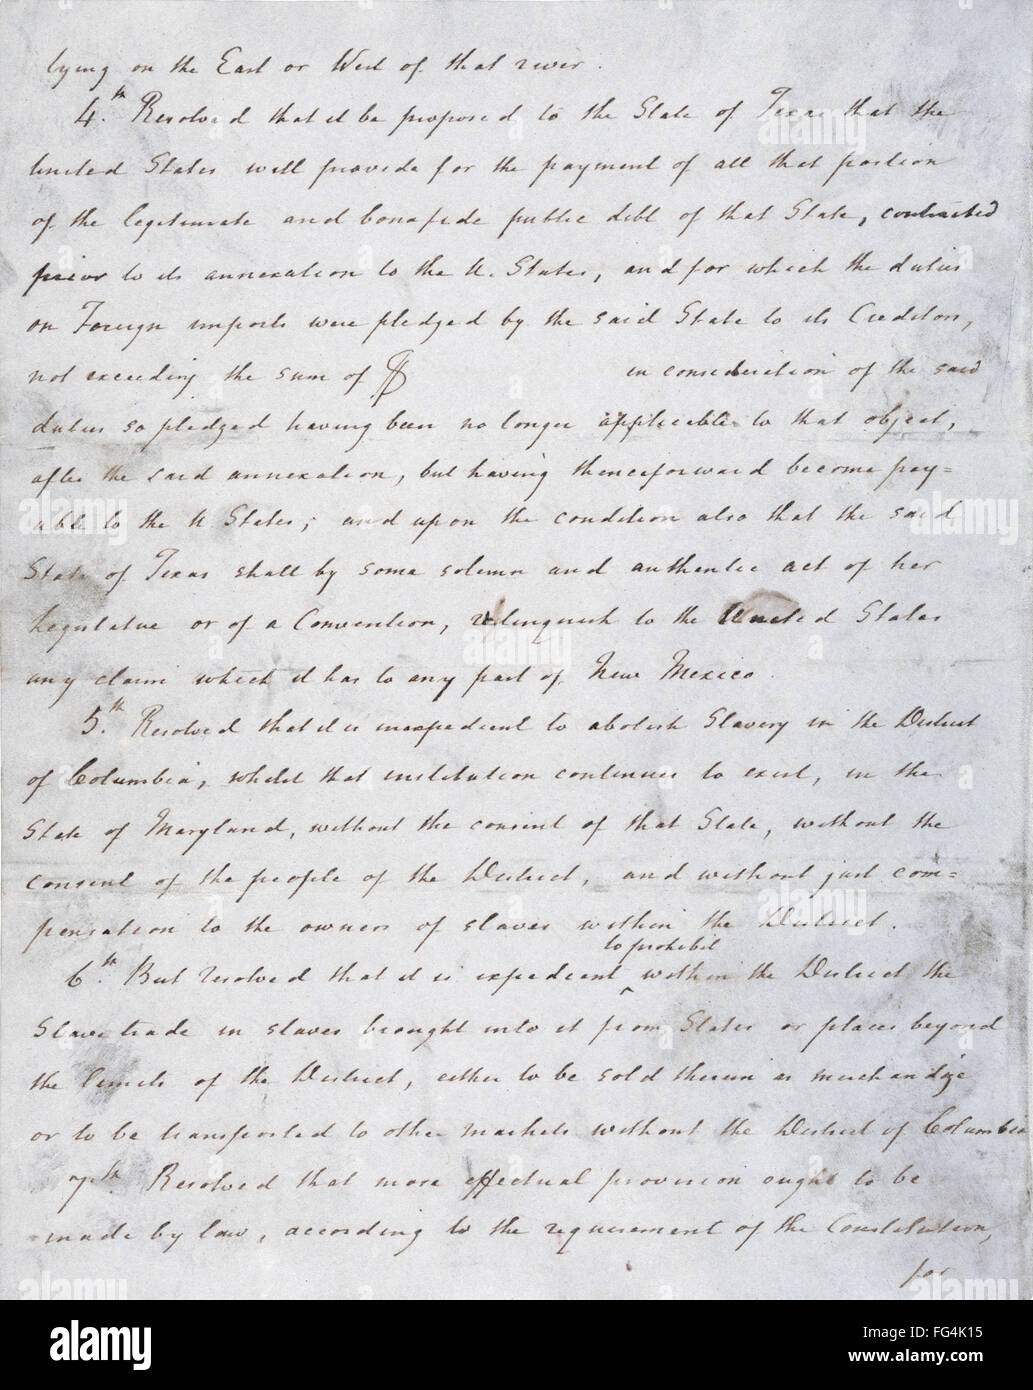 COMPROMISE OF 1850. /nHenry Clay's handwritten draft of resolutions, part of the Compromise of 1850. Stock Photo